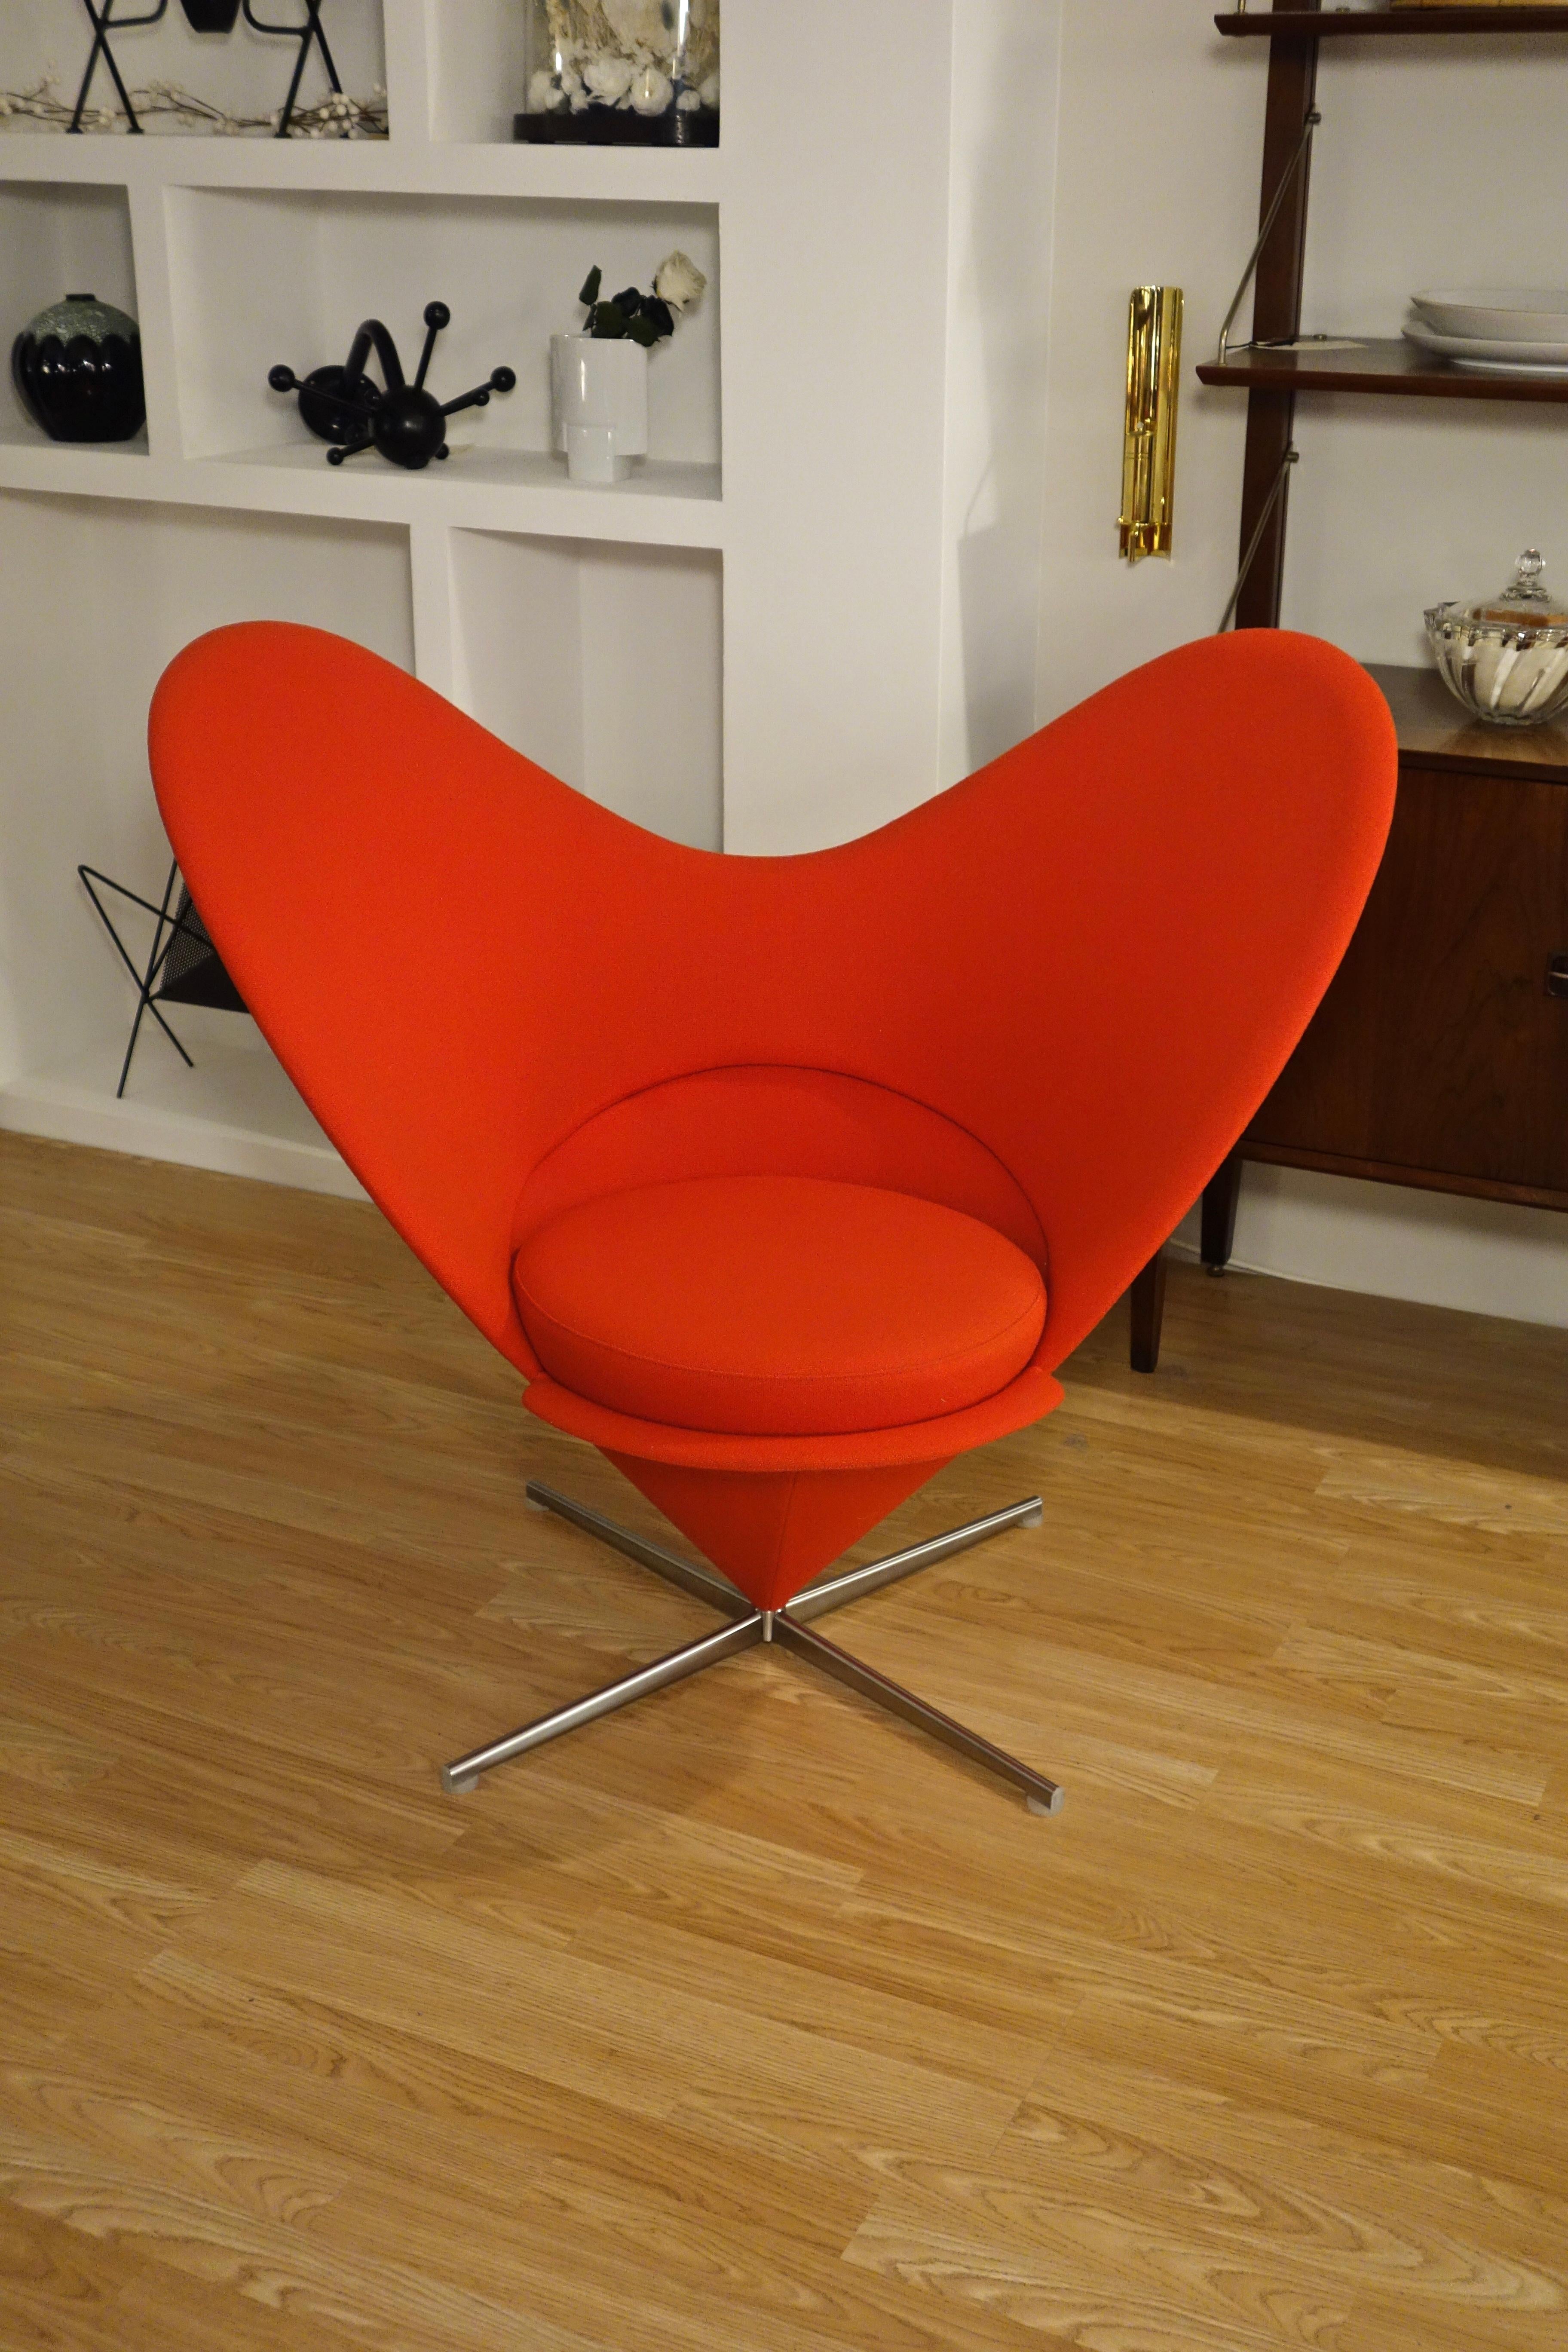 Contemporary Red Heart Cone Chair by Verner Panton for Vitra 2000s